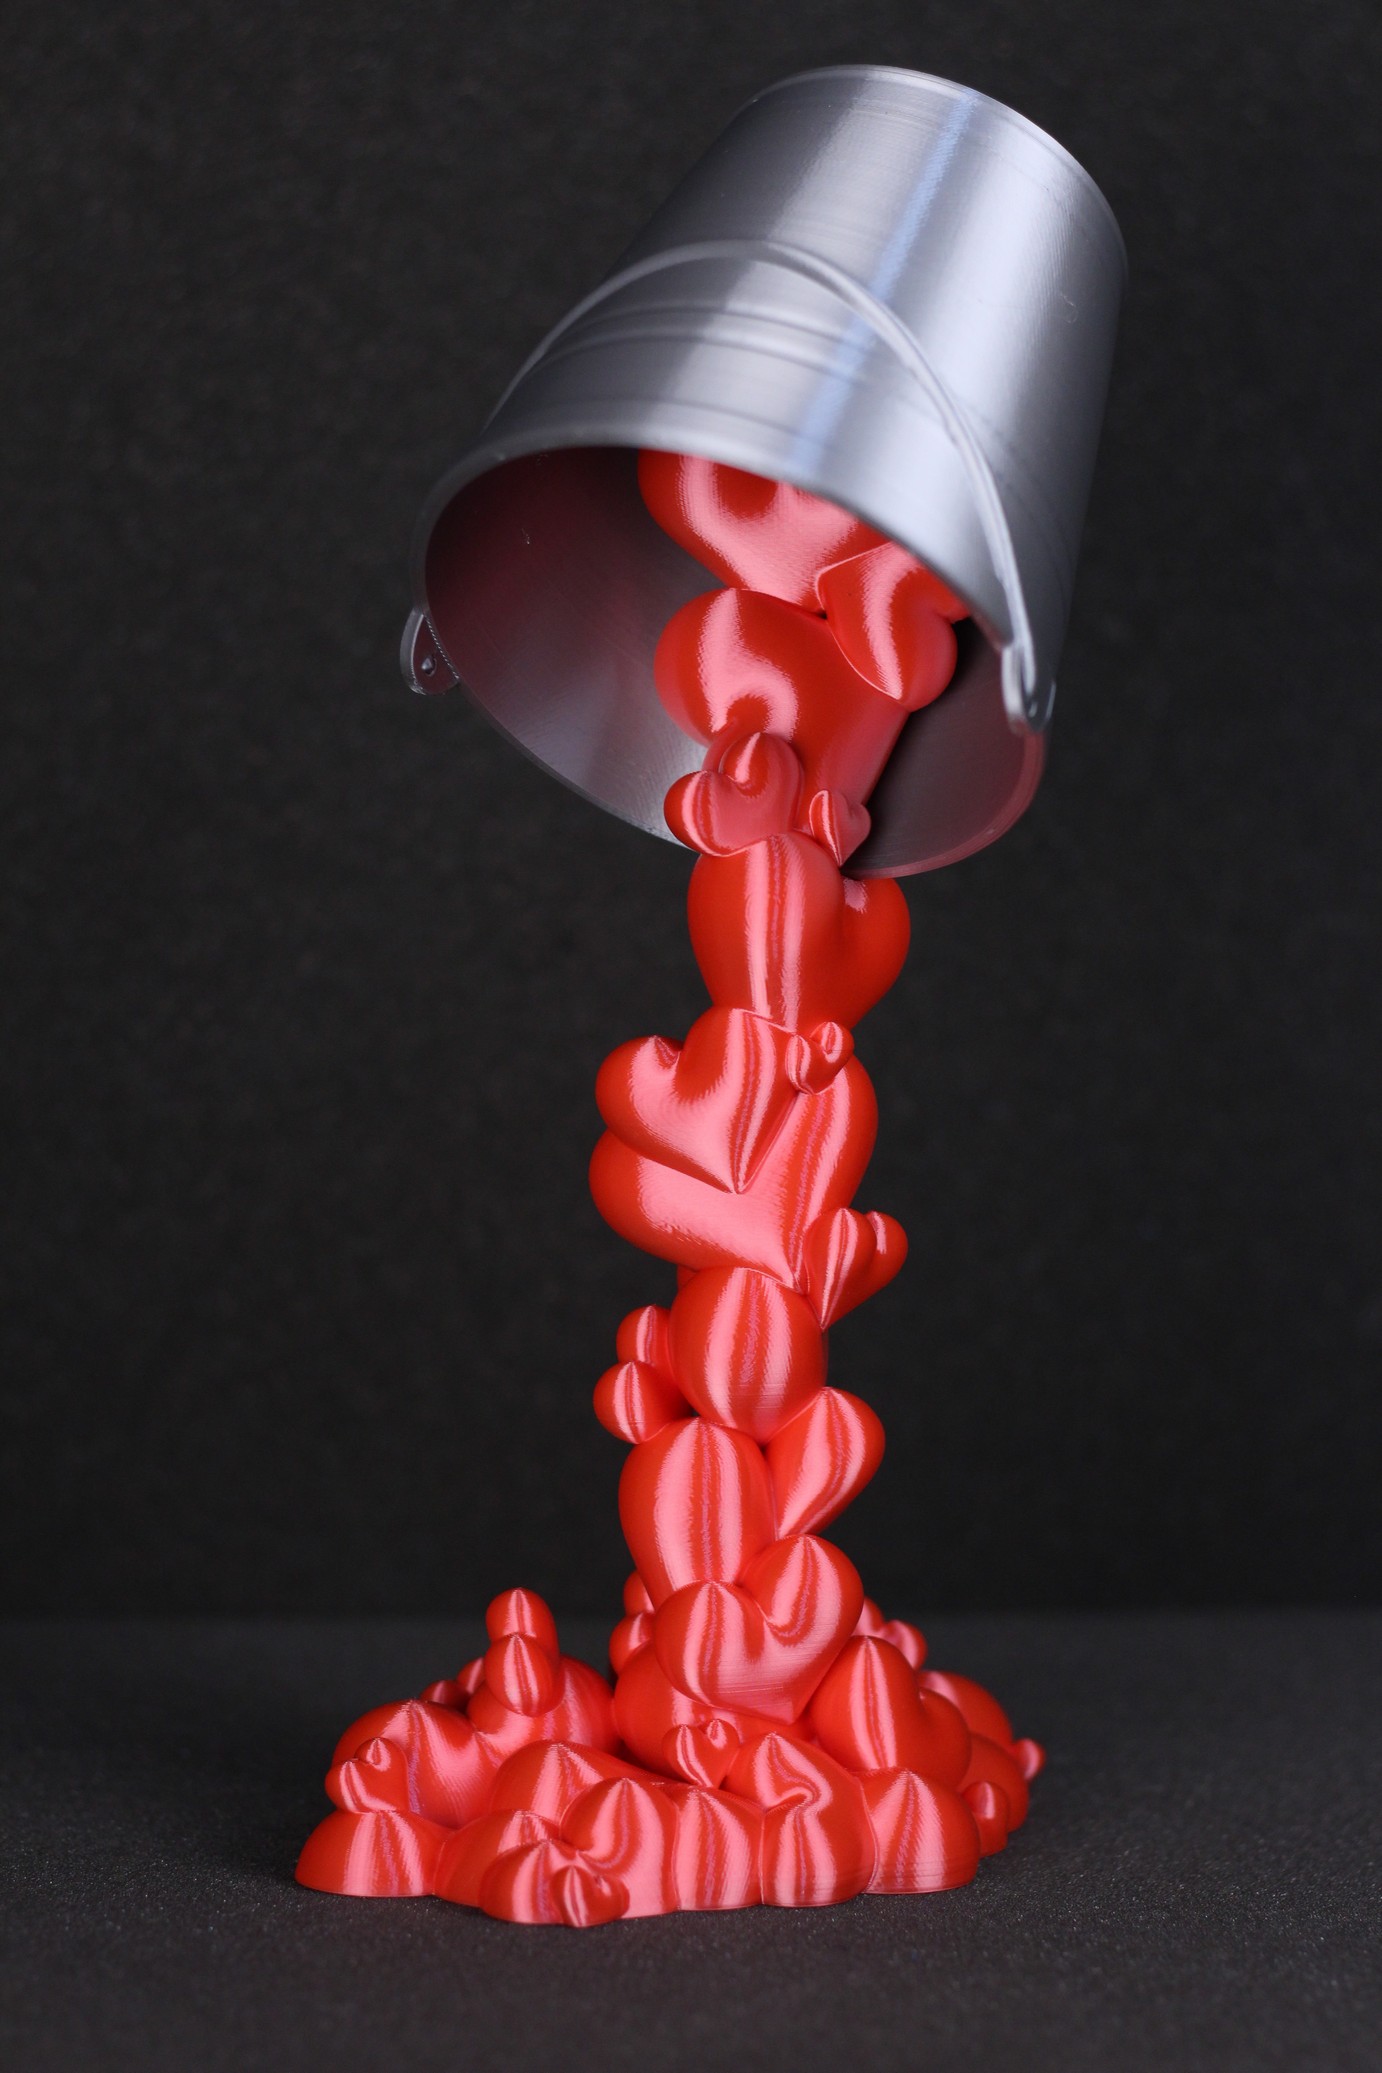 Pouring-Hearts-printed-on-Ender-3-S1-2